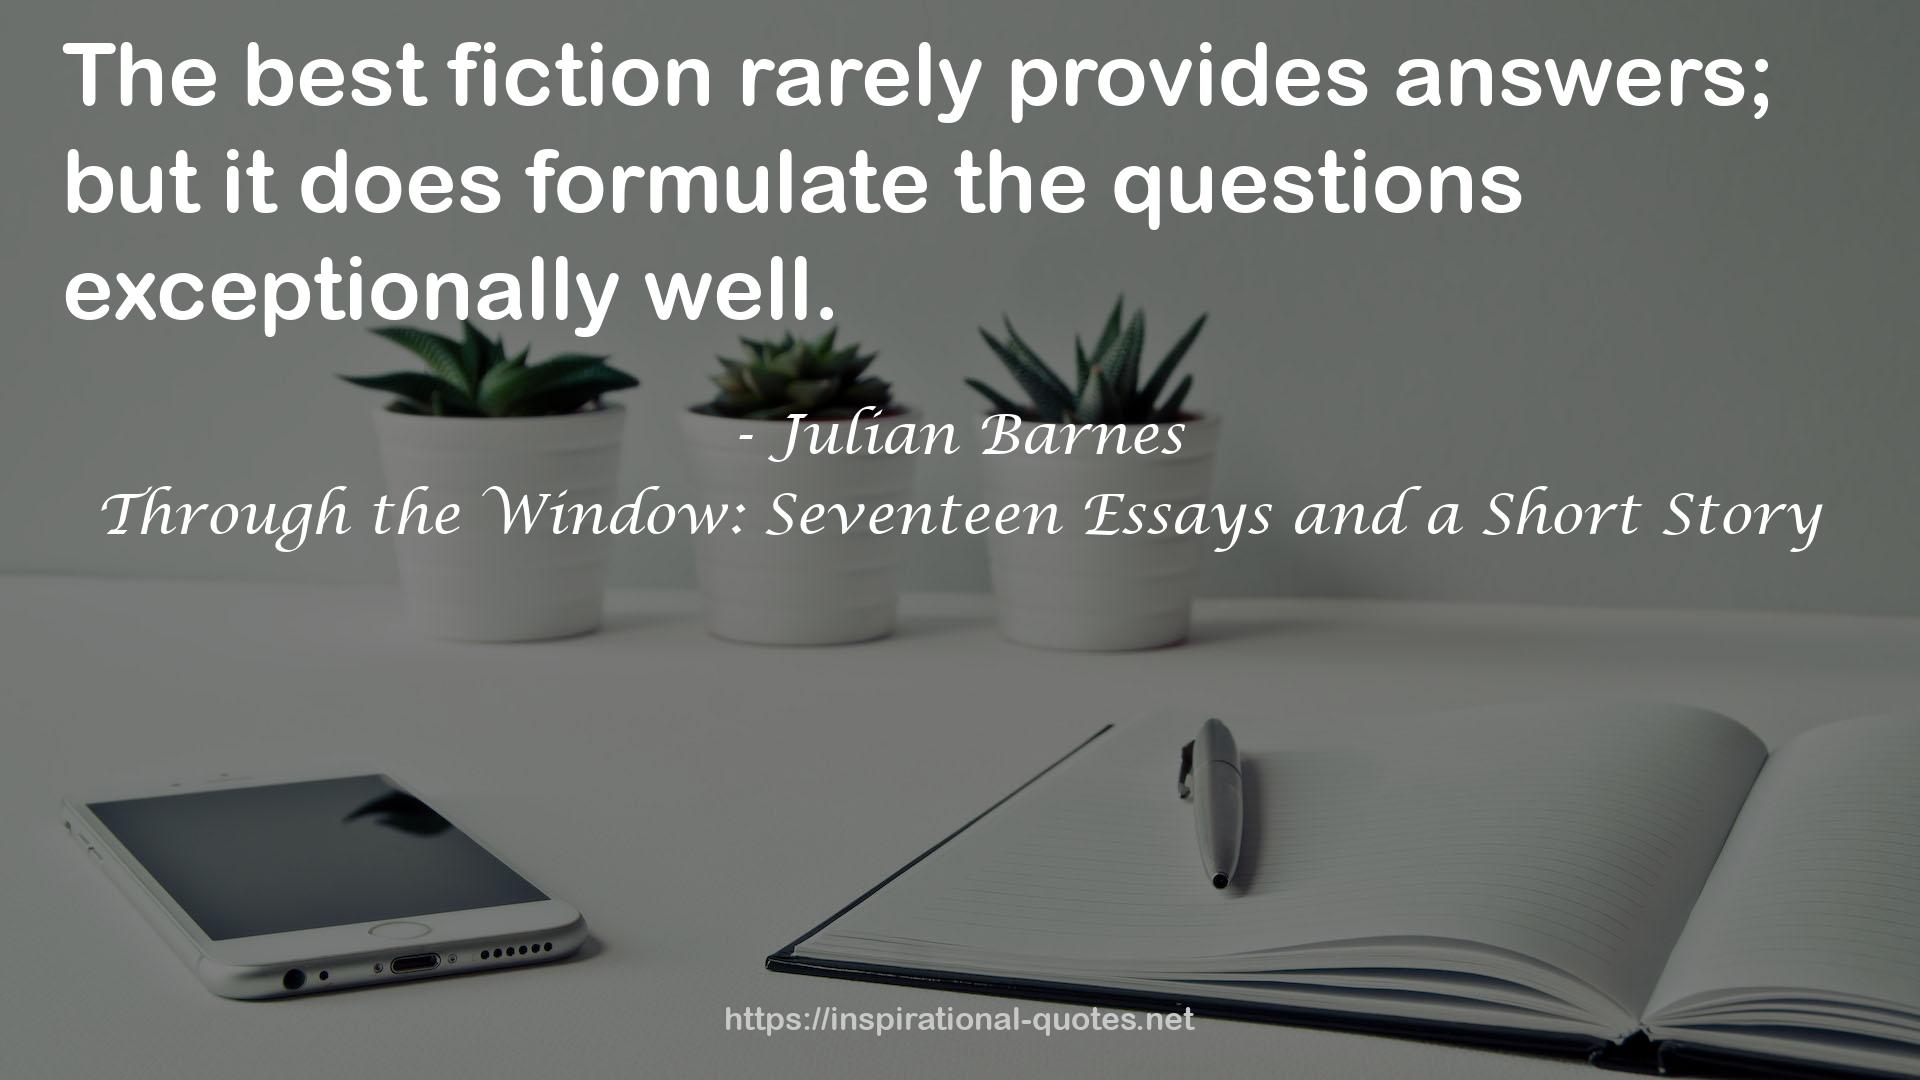 Through the Window: Seventeen Essays and a Short Story QUOTES